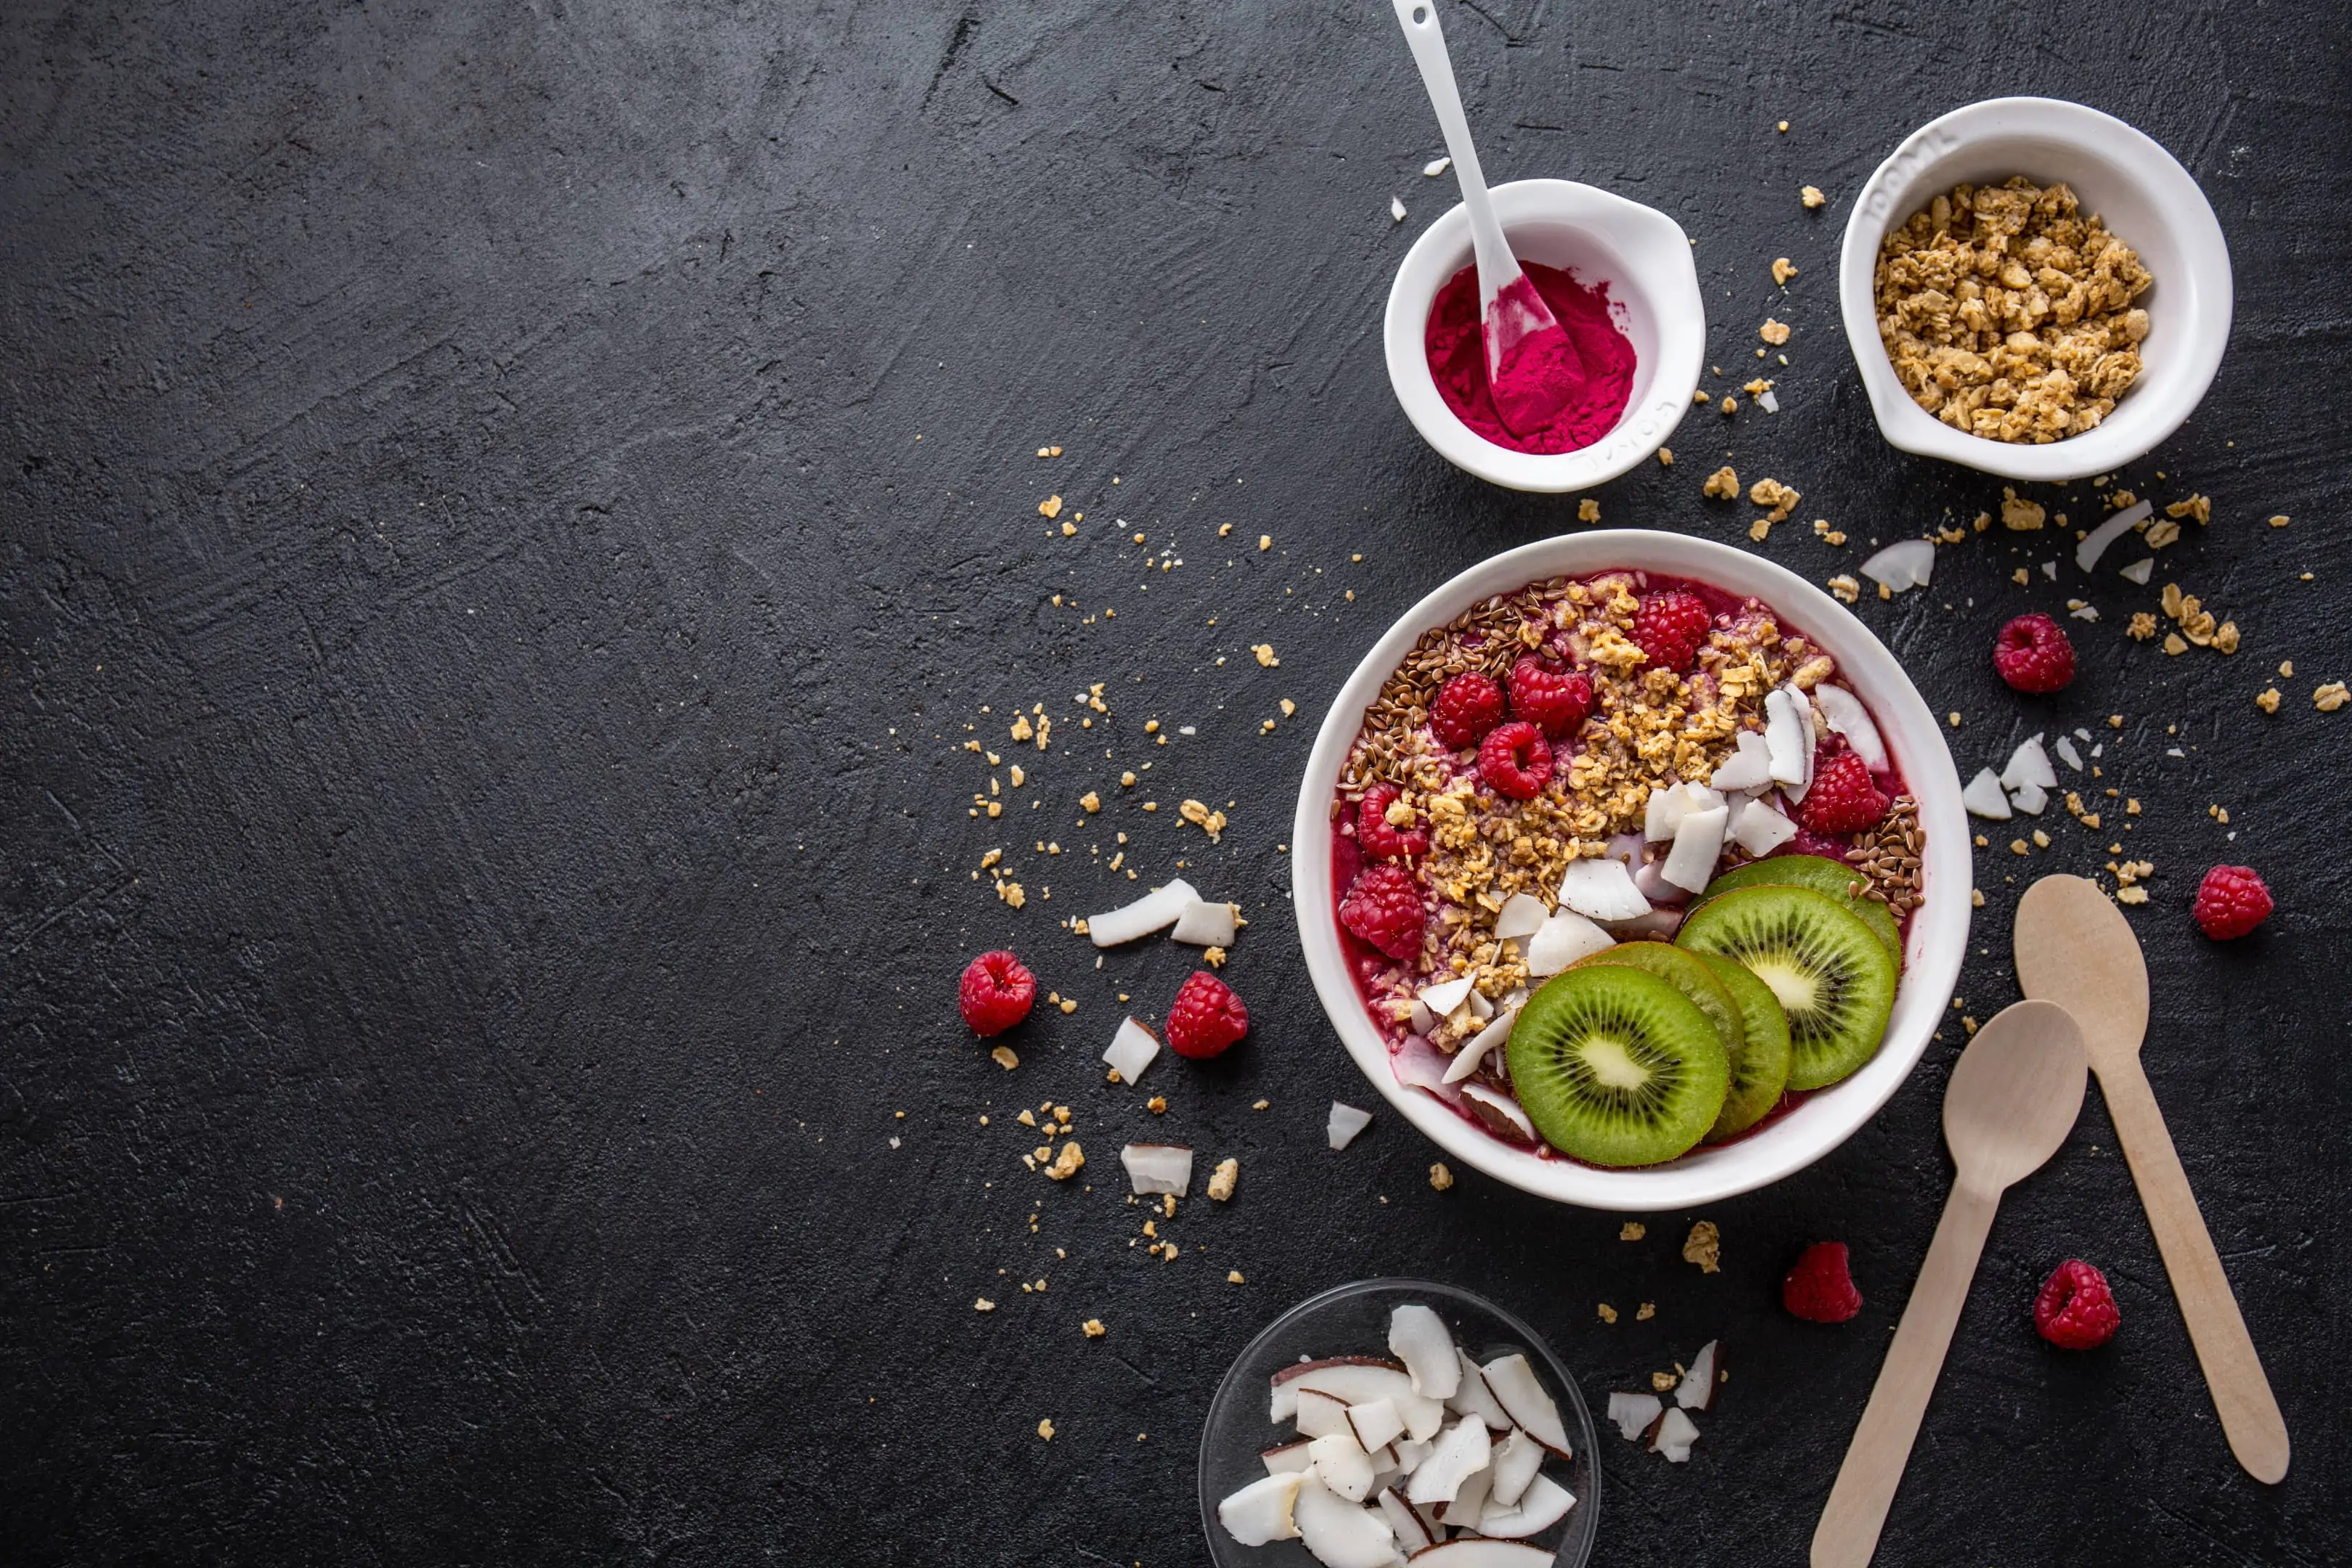 Homemade smoothie bowl made with berries, coconut, kiwi and oats